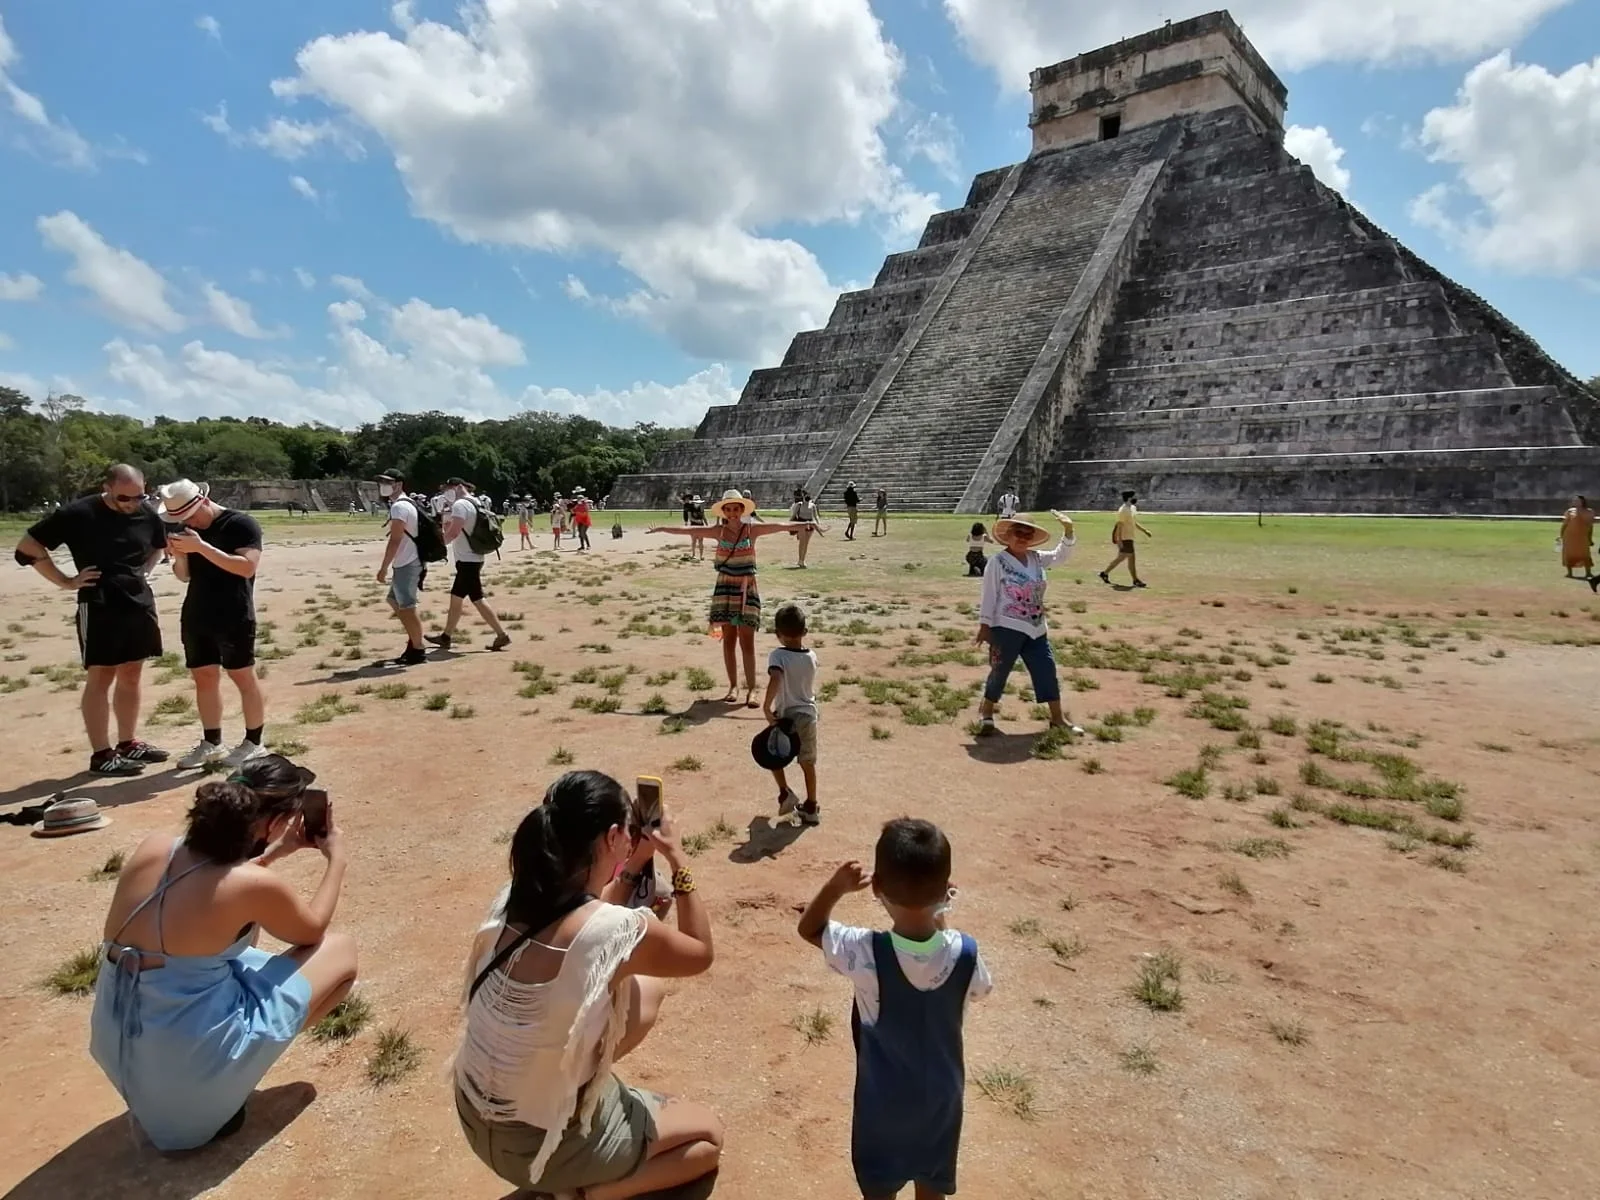 Tourists enjoying and taking photos at the base of the El Castillo pyramid at Chichen Itza under a sunny sky with scattered clouds.